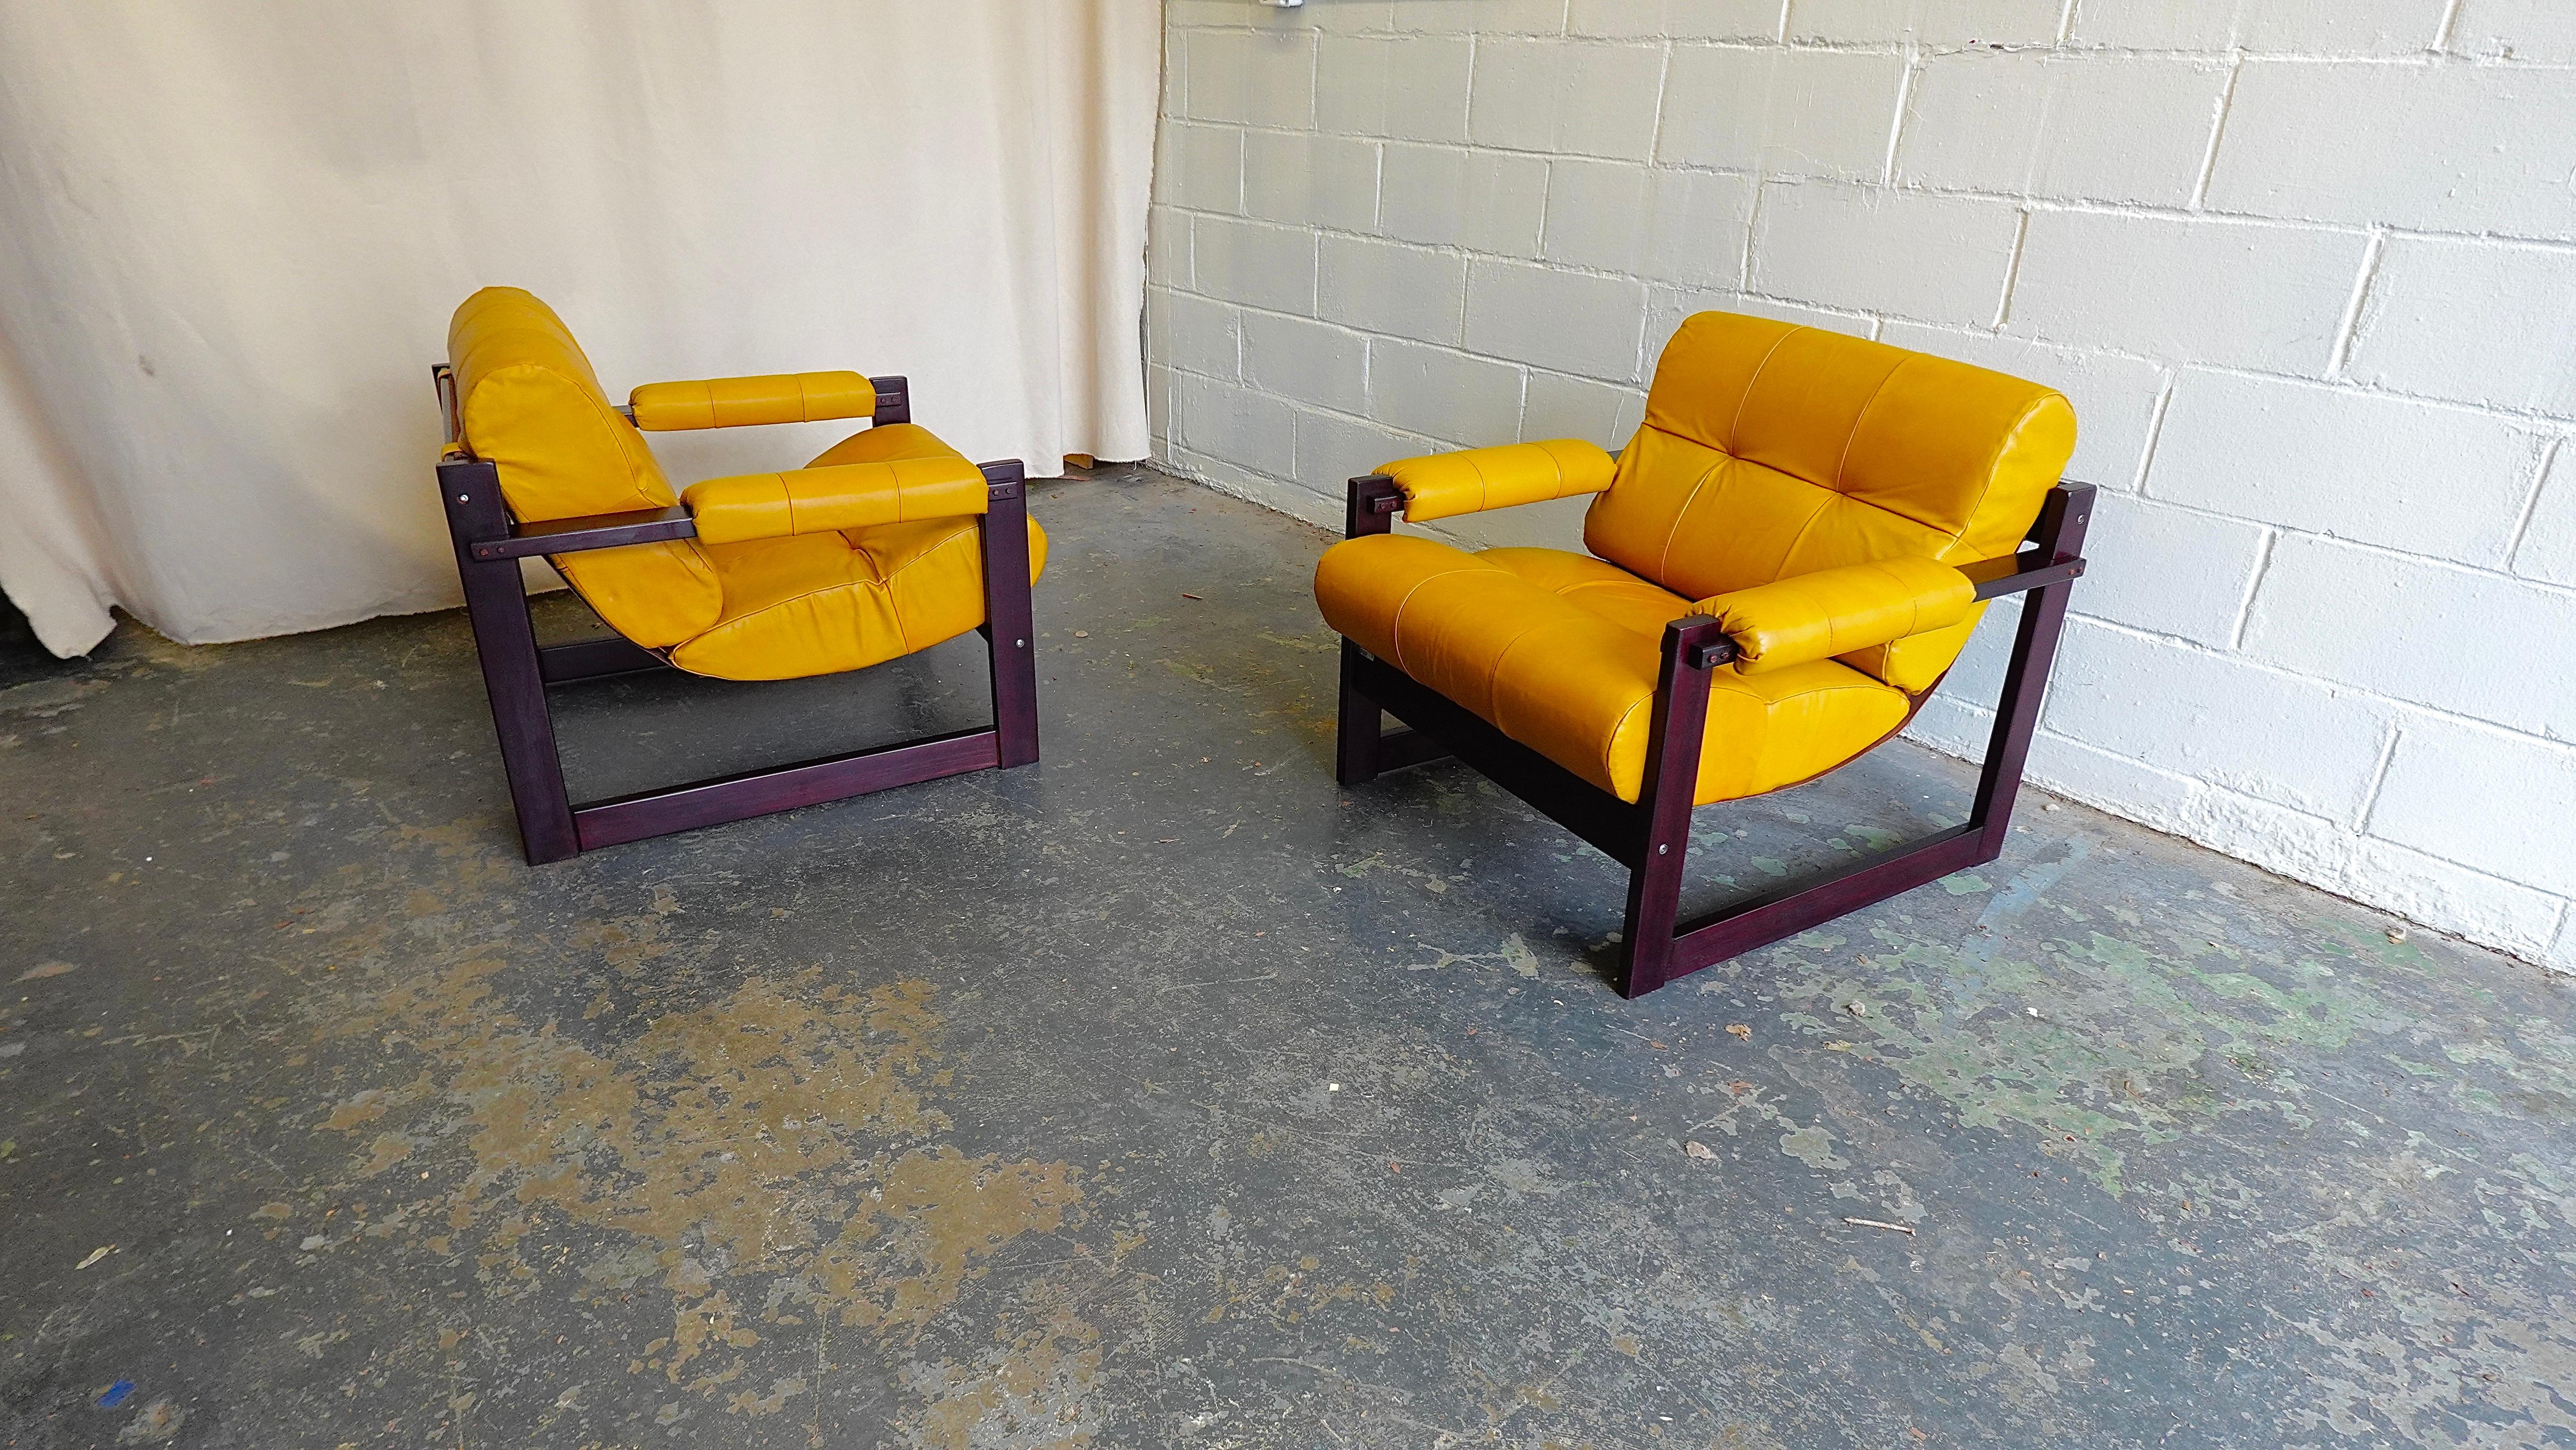 Pr. Percival Lafer MP-167 Lounge Chairs in Jatoba & Leather, 1970s For Sale 8